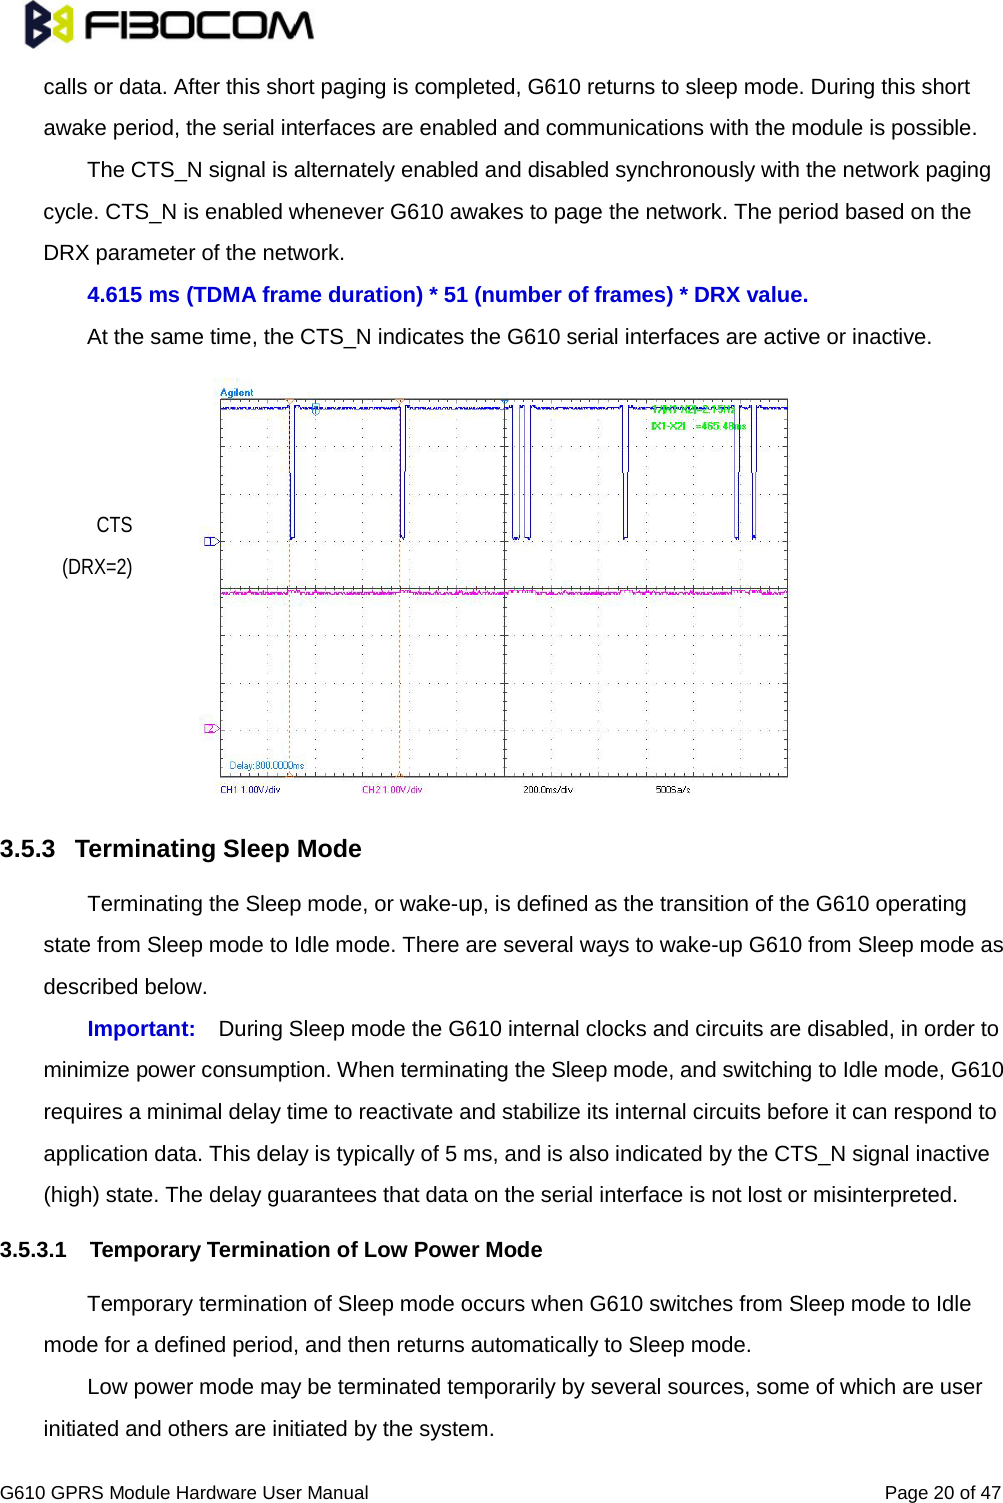                                                                                                          G610 GPRS Module Hardware User Manual                                                          Page 20 of 47  calls or data. After this short paging is completed, G610 returns to sleep mode. During this short awake period, the serial interfaces are enabled and communications with the module is possible.   The CTS_N signal is alternately enabled and disabled synchronously with the network paging cycle. CTS_N is enabled whenever G610 awakes to page the network. The period based on the DRX parameter of the network.   4.615 ms (TDMA frame duration) * 51 (number of frames) * DRX value. At the same time, the CTS_N indicates the G610 serial interfaces are active or inactive.              3.5.3 Terminating Sleep Mode   Terminating the Sleep mode, or wake-up, is defined as the transition of the G610 operating state from Sleep mode to Idle mode. There are several ways to wake-up G610 from Sleep mode as described below.   Important: During Sleep mode the G610 internal clocks and circuits are disabled, in order to minimize power consumption. When terminating the Sleep mode, and switching to Idle mode, G610 requires a minimal delay time to reactivate and stabilize its internal circuits before it can respond to application data. This delay is typically of 5 ms, and is also indicated by the CTS_N signal inactive (high) state. The delay guarantees that data on the serial interface is not lost or misinterpreted.   3.5.3.1 Temporary Termination of Low Power Mode   Temporary termination of Sleep mode occurs when G610 switches from Sleep mode to Idle mode for a defined period, and then returns automatically to Sleep mode.   Low power mode may be terminated temporarily by several sources, some of which are user initiated and others are initiated by the system.   CTS (DRX=2) 